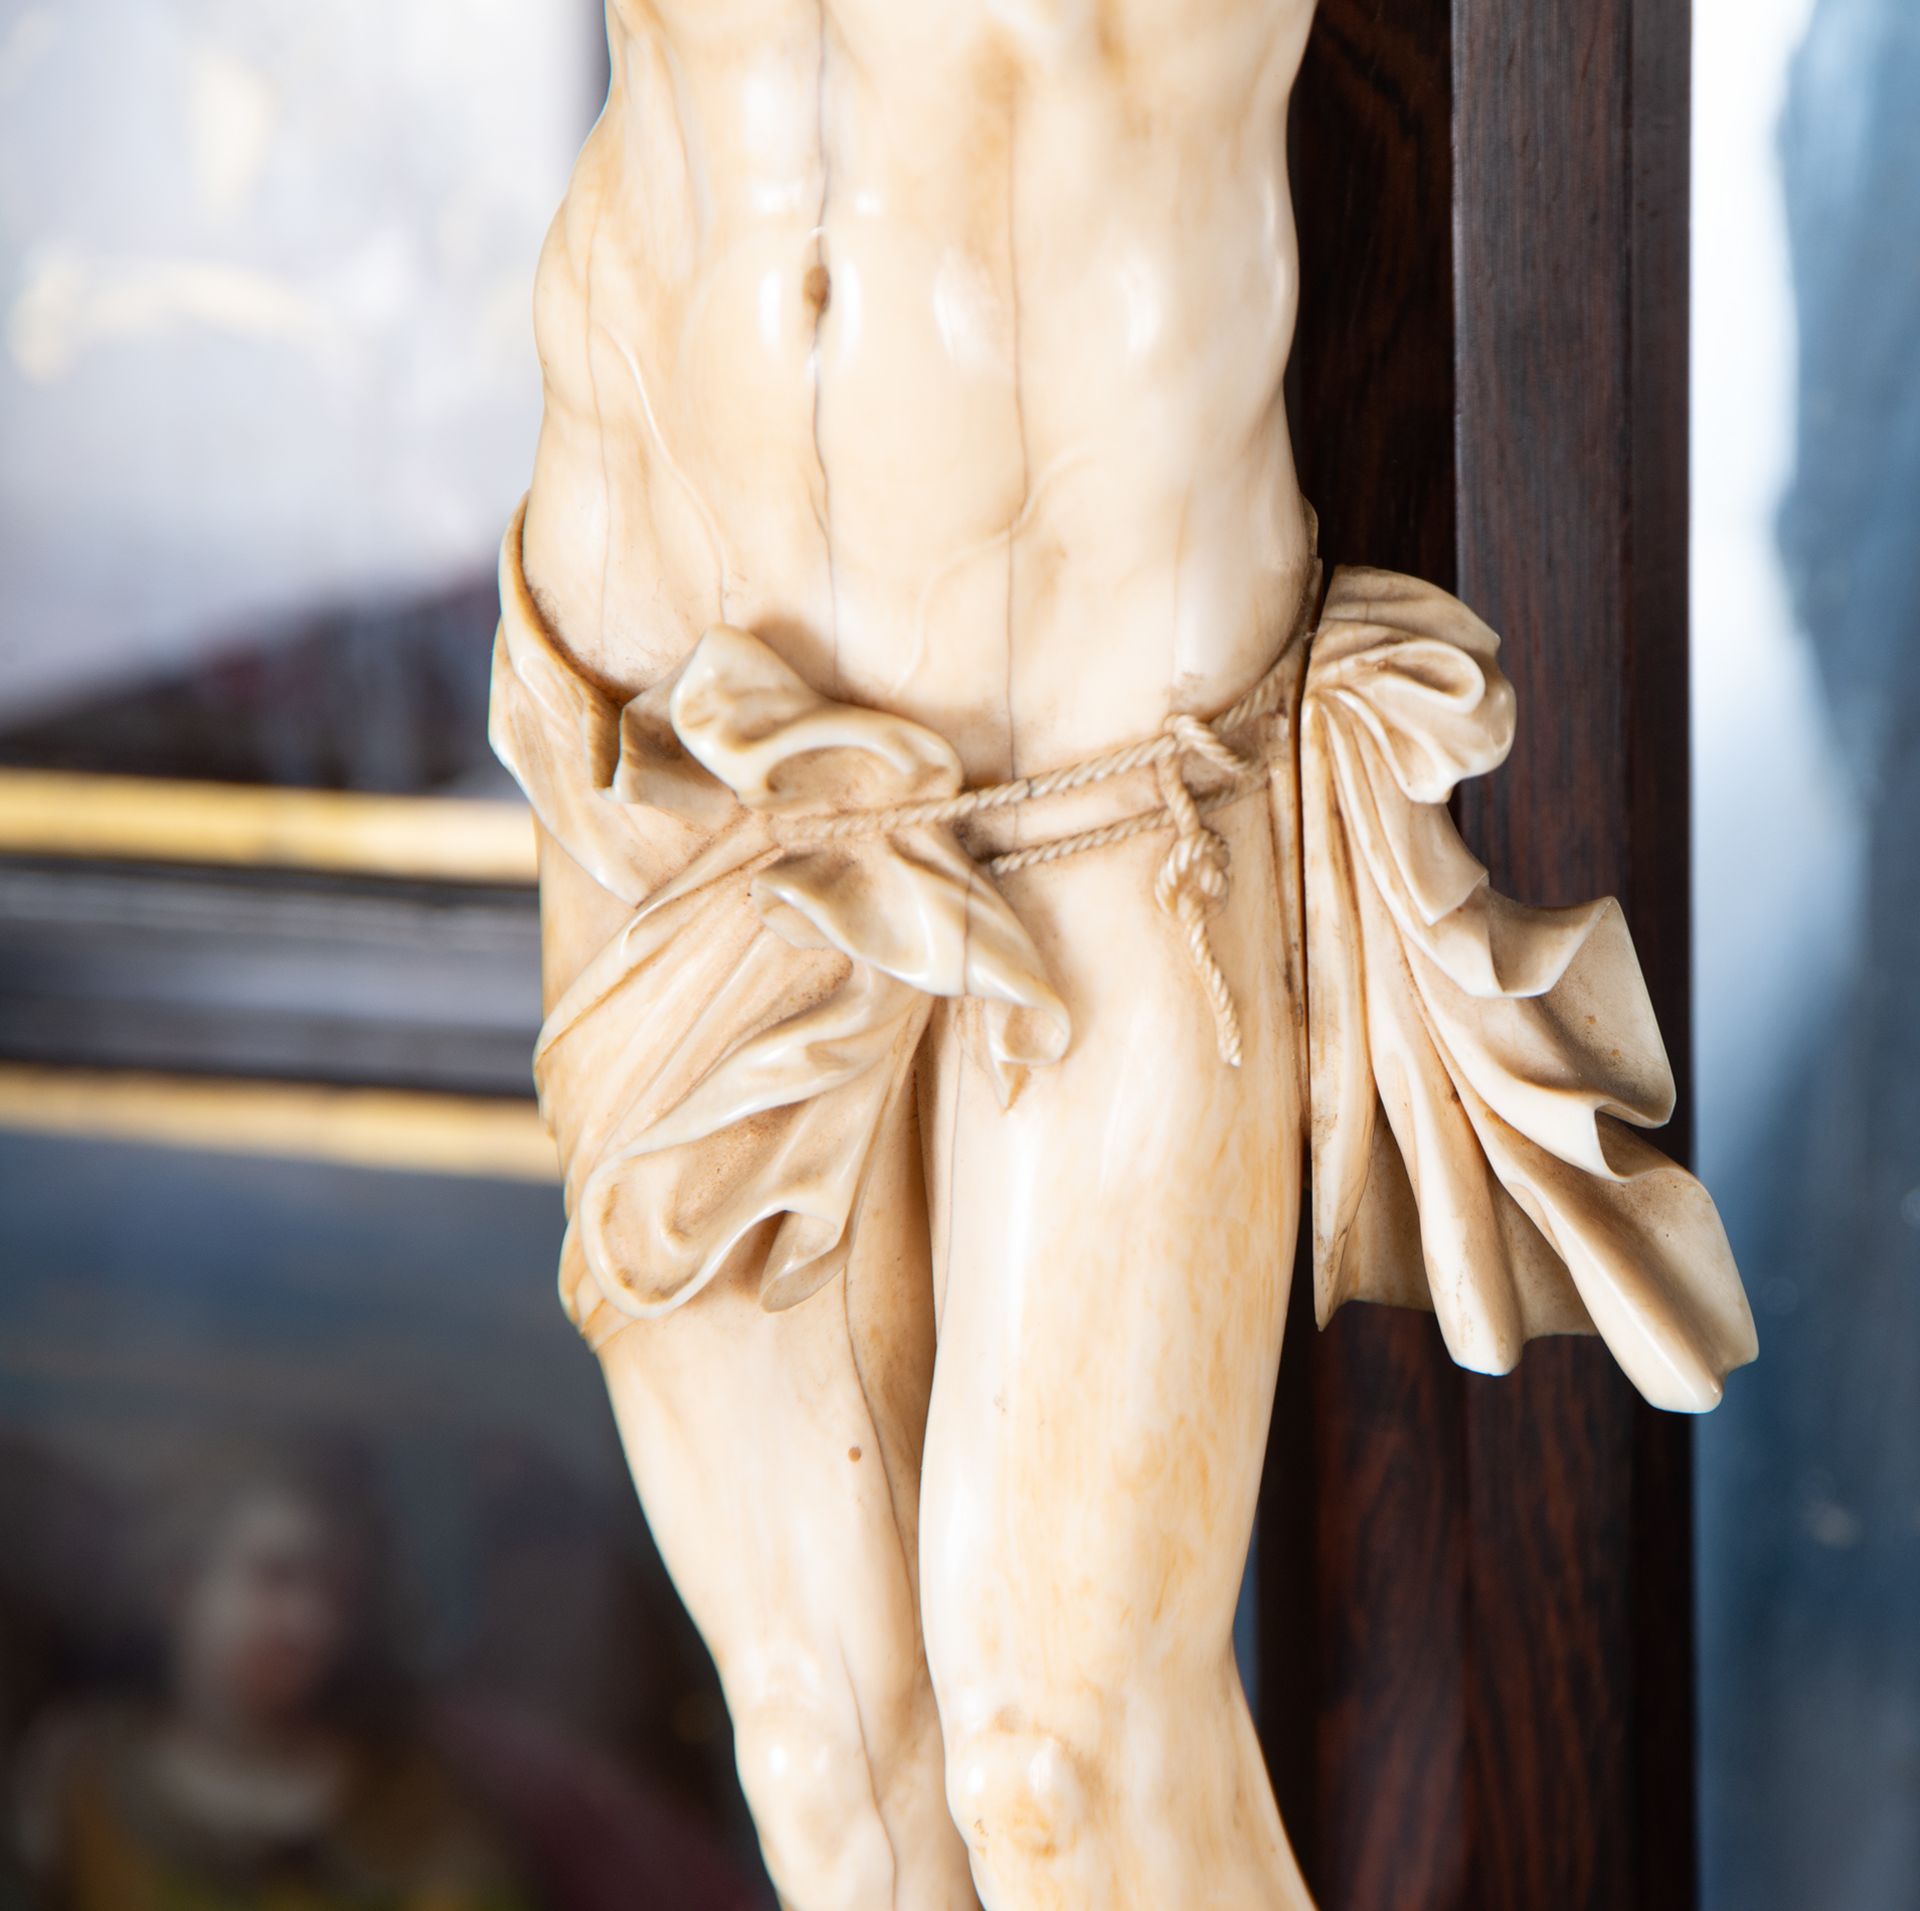 Large Neapolitan Christ in Painted Glass Niche, 17th - 18th centuries - Image 6 of 17